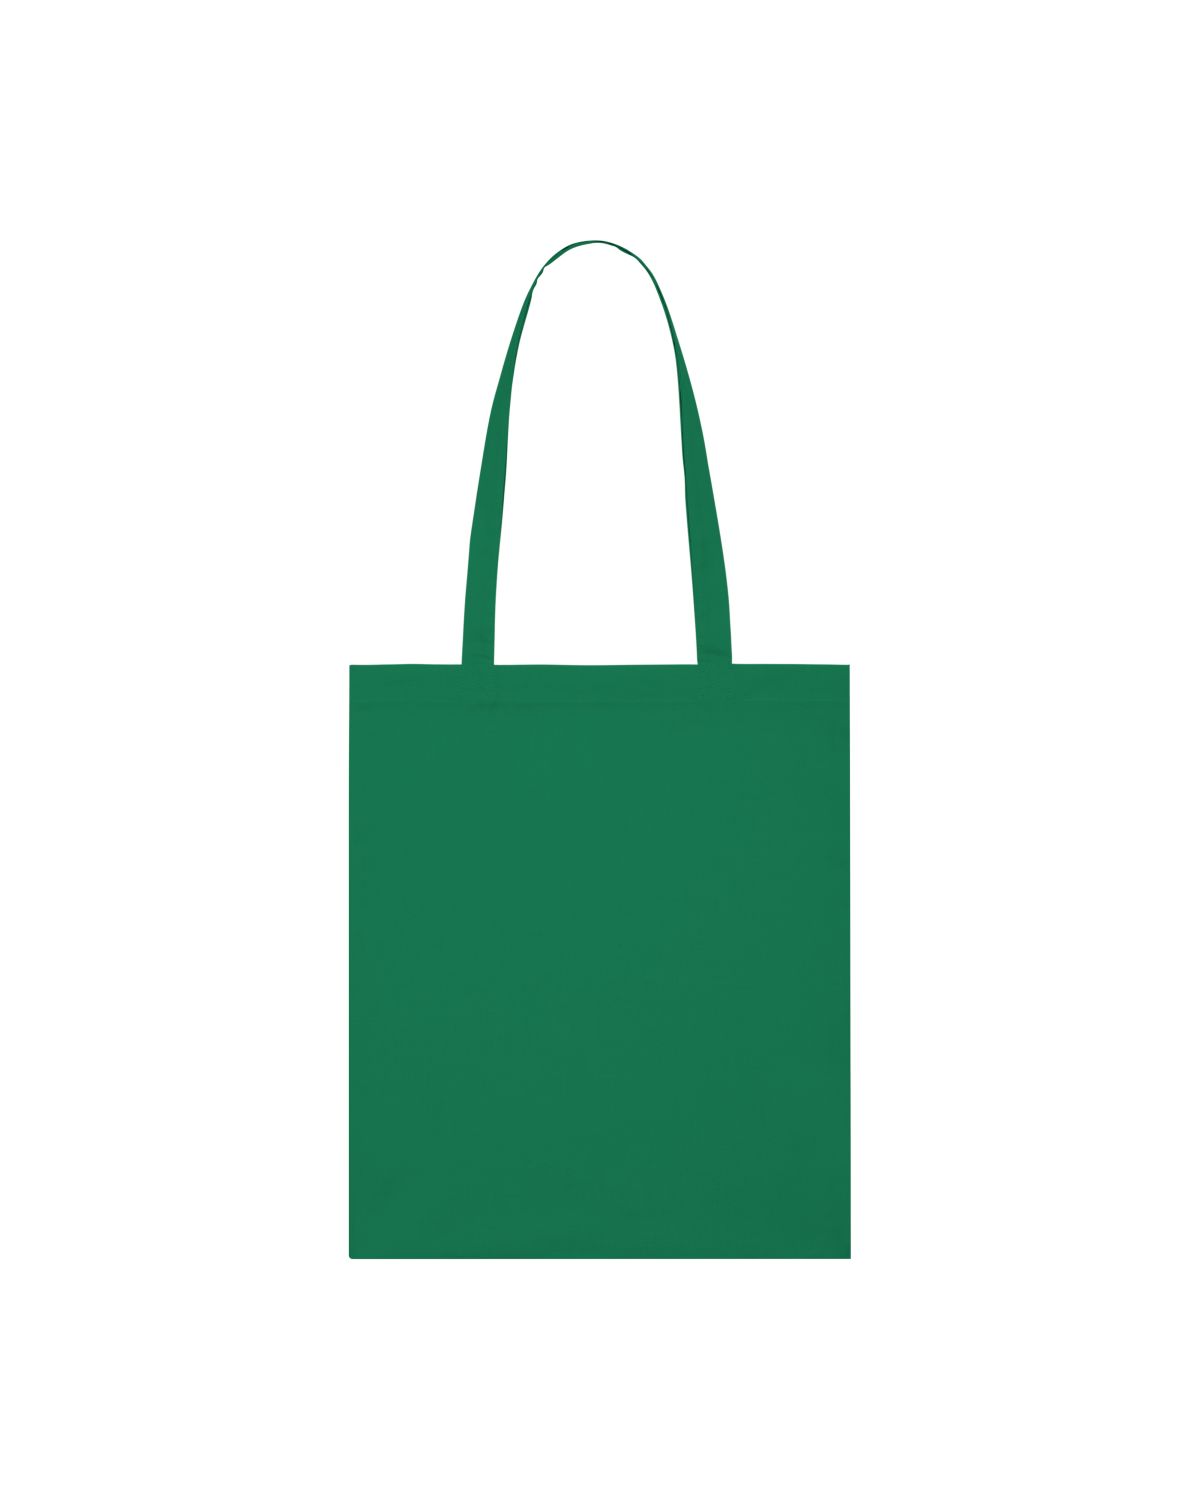 customize your own tote bag